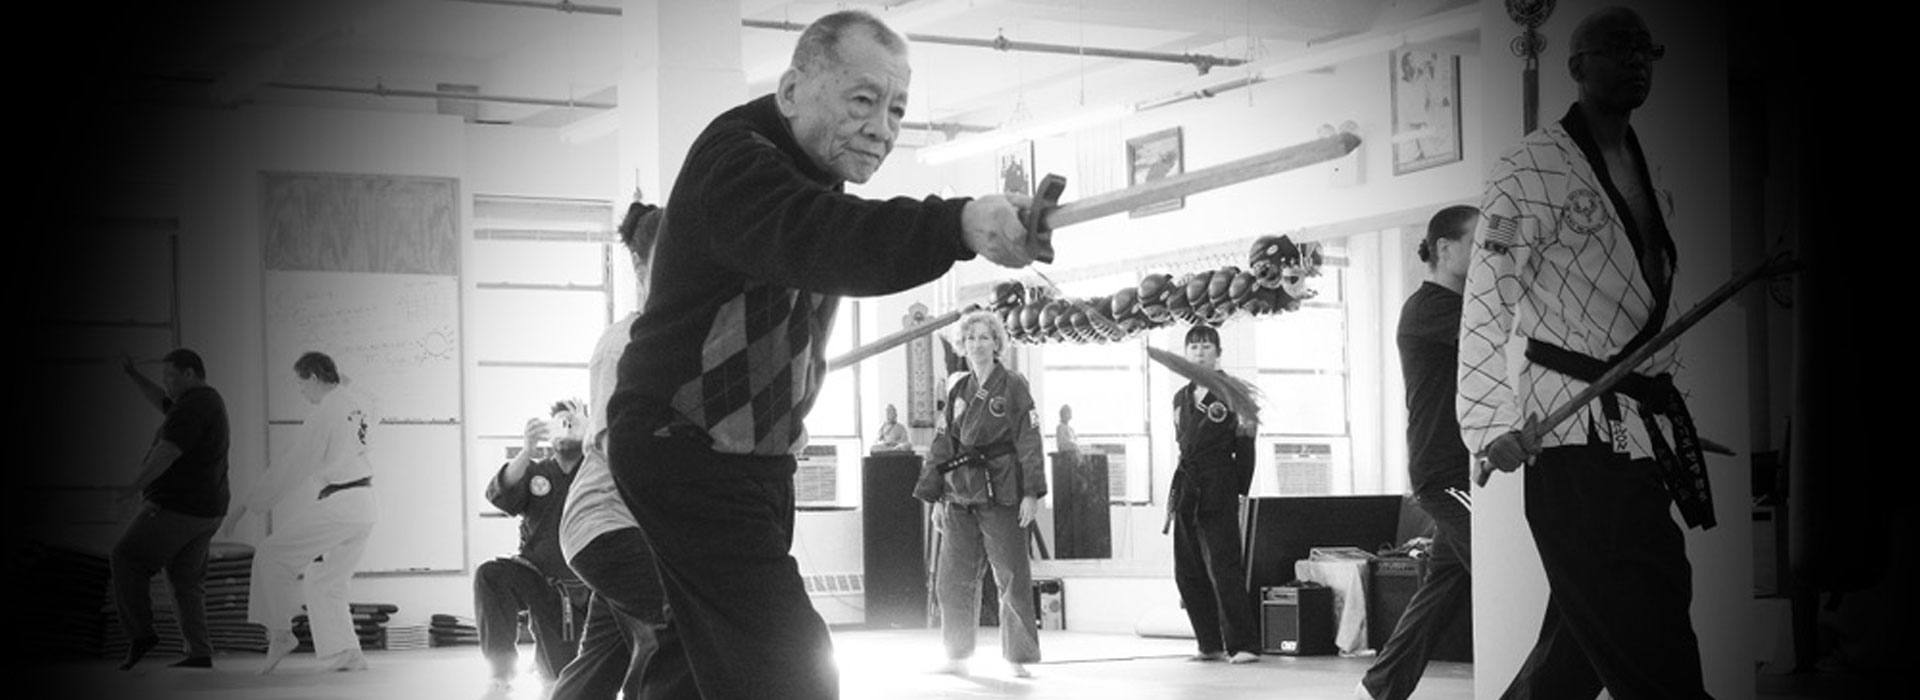 Combative Tai Chi And Weapons Training Near Queens